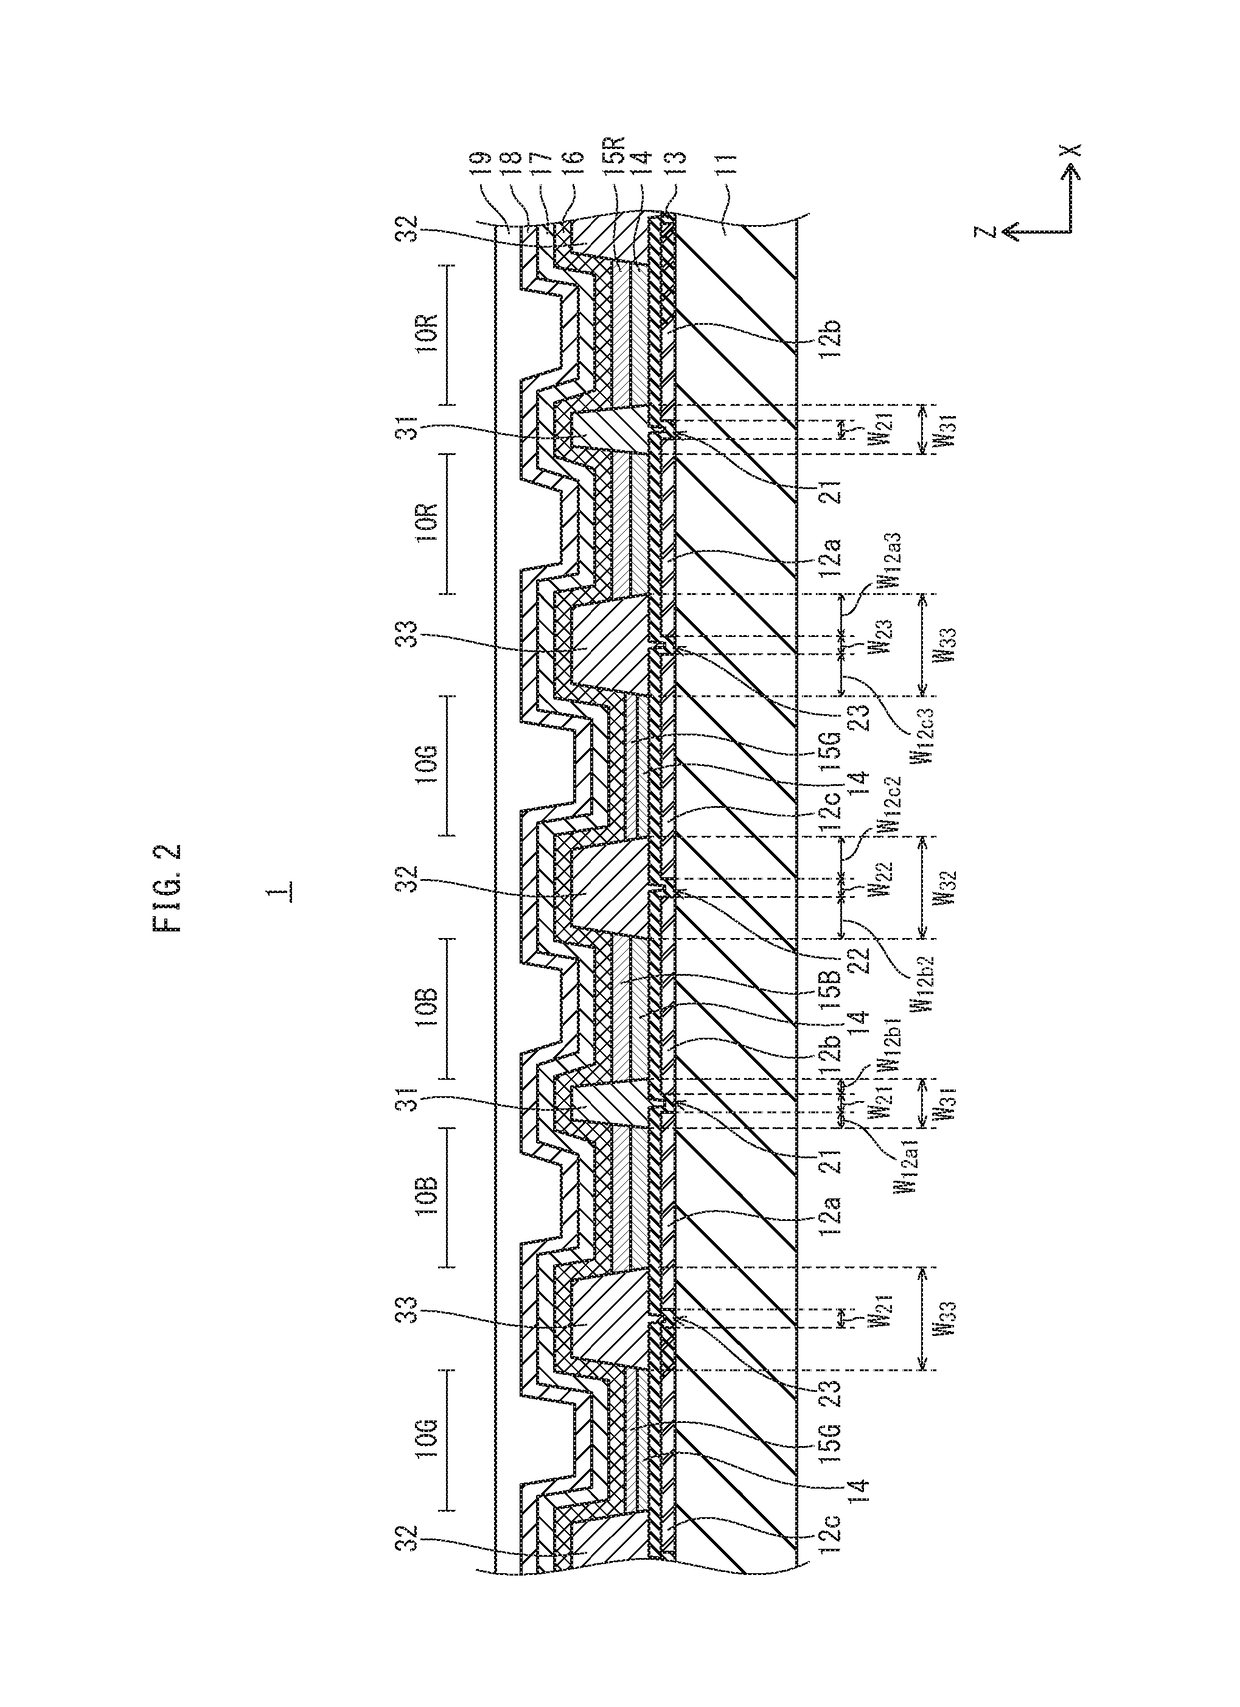 Display panel and method for manufacturing same